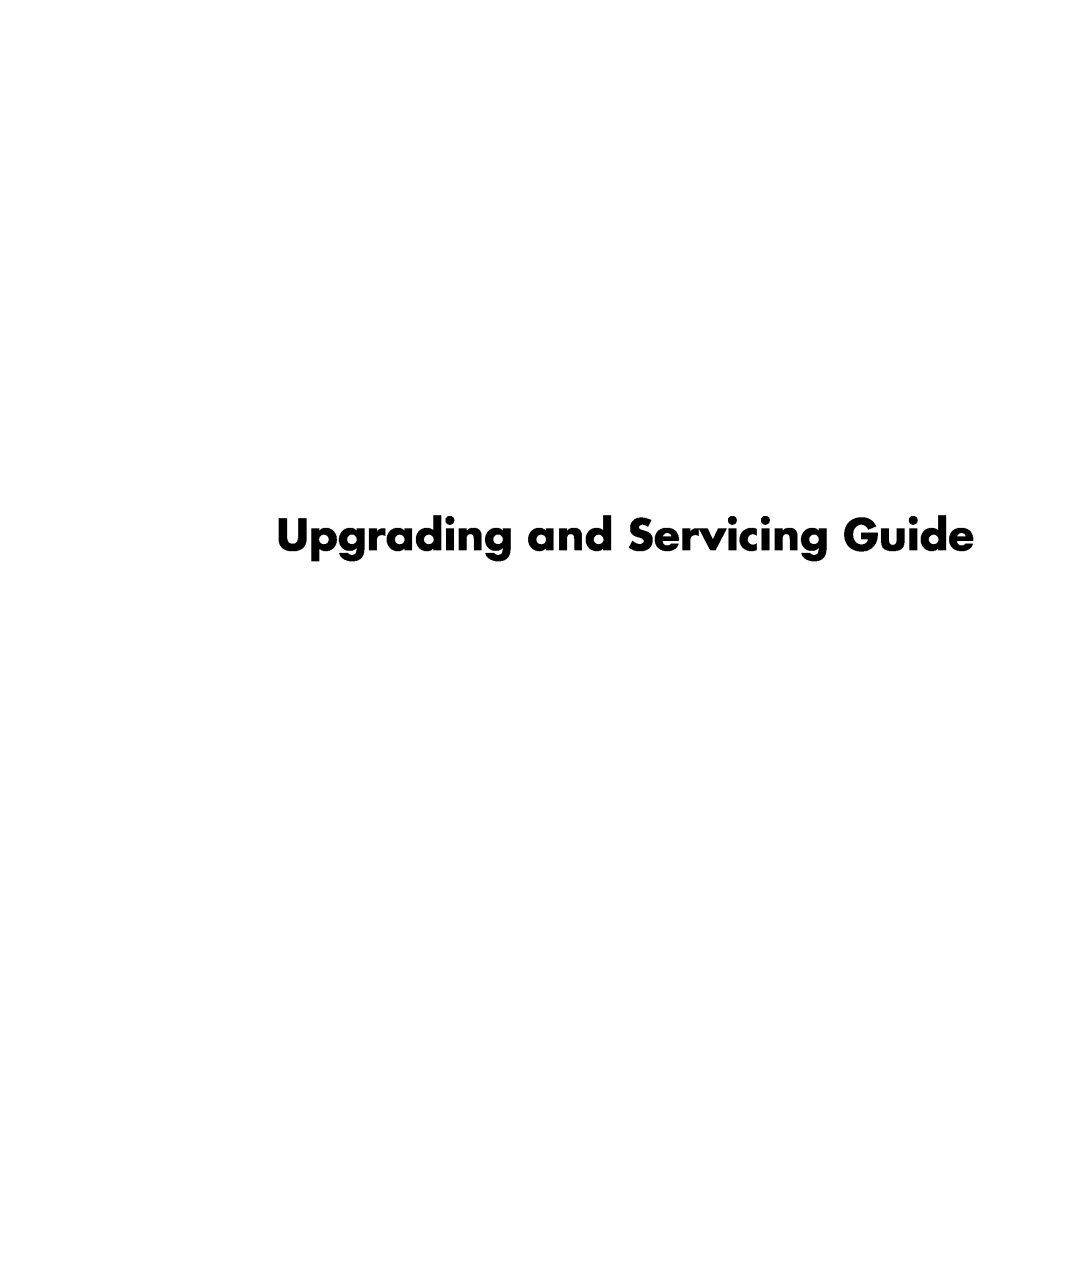 HP SR5448F, SR5450F, SR5433WM, SR5421F, SR5413WM, SR5350F, SR5410F, SR5402FH, SR5333WM manual Limited Warranty and Support Guide 